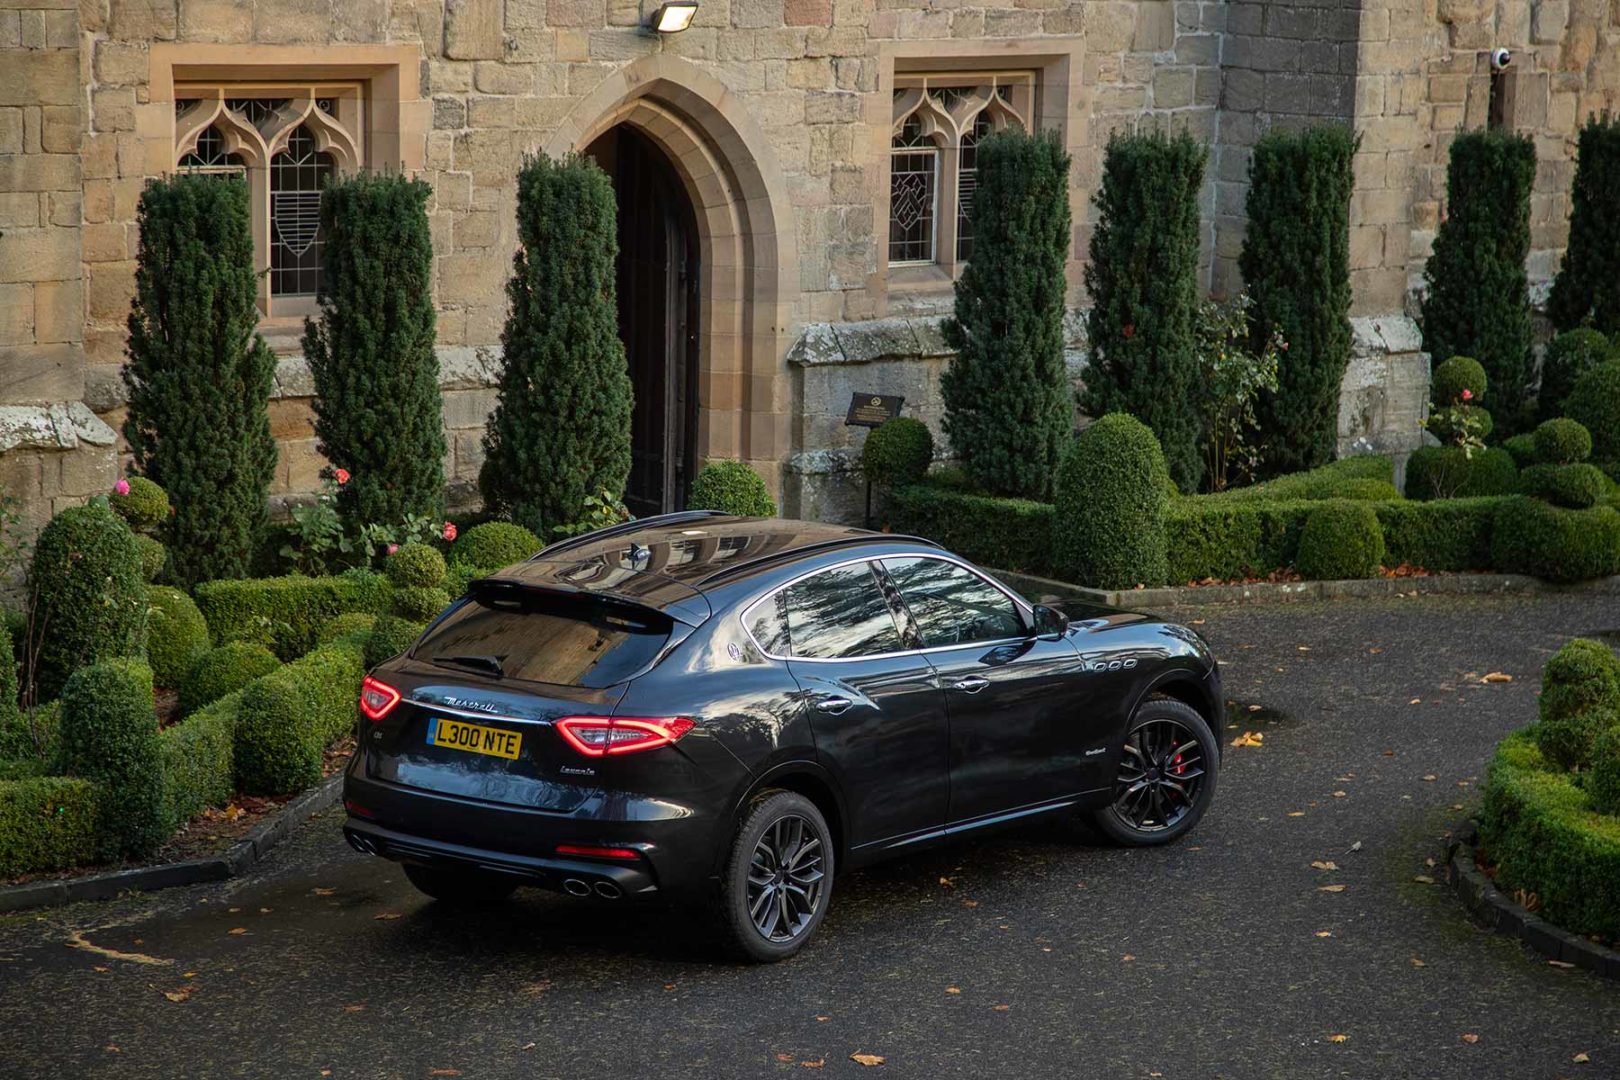 2019 Maserati Levante UK First Drive Review